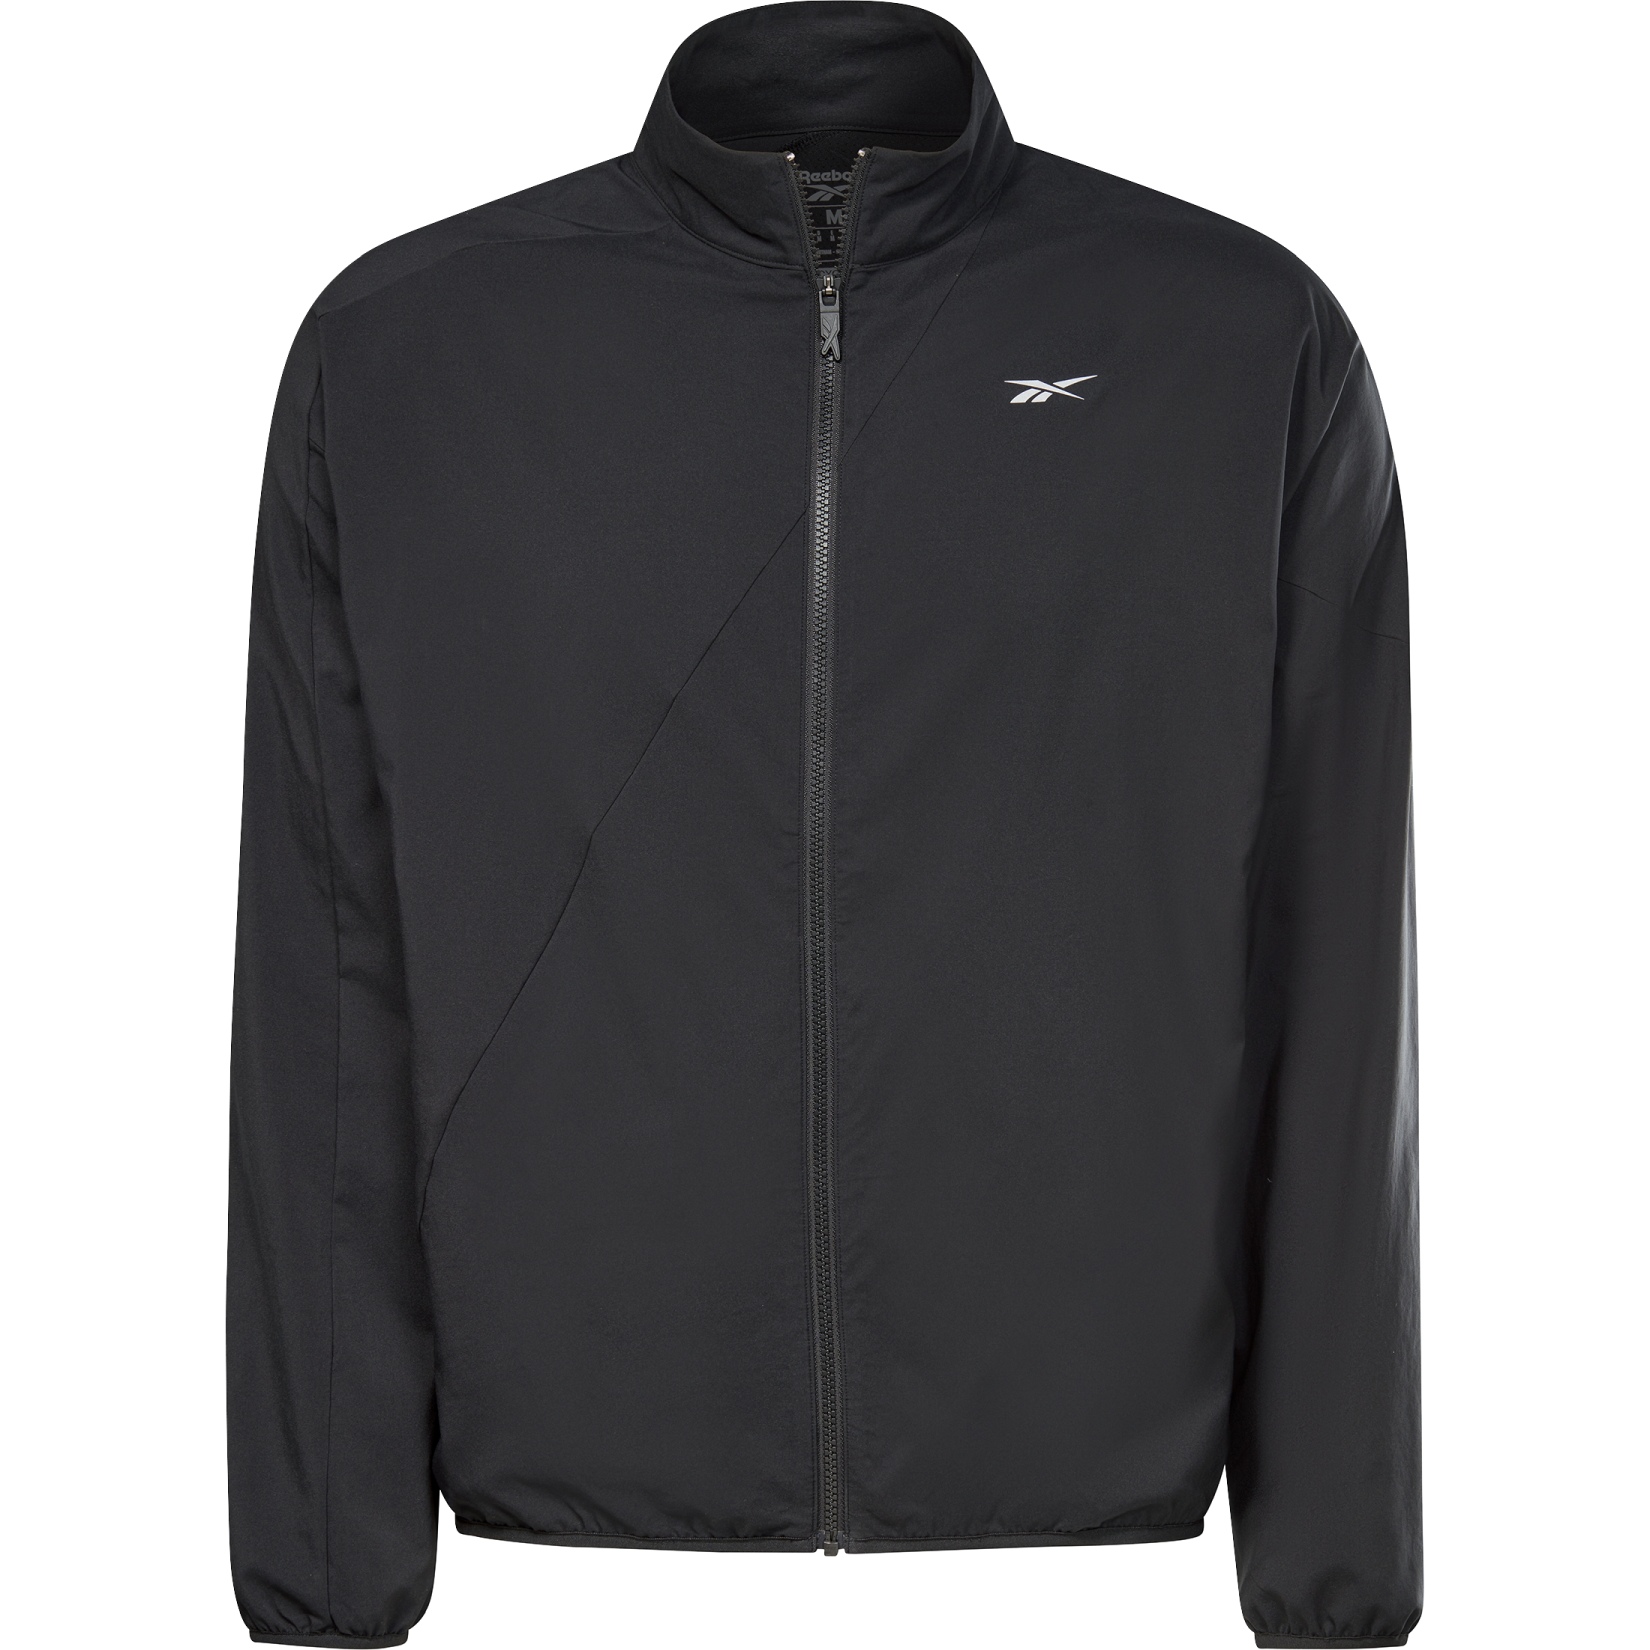 Picture of Reebok Running Woven Wind Jacket - black